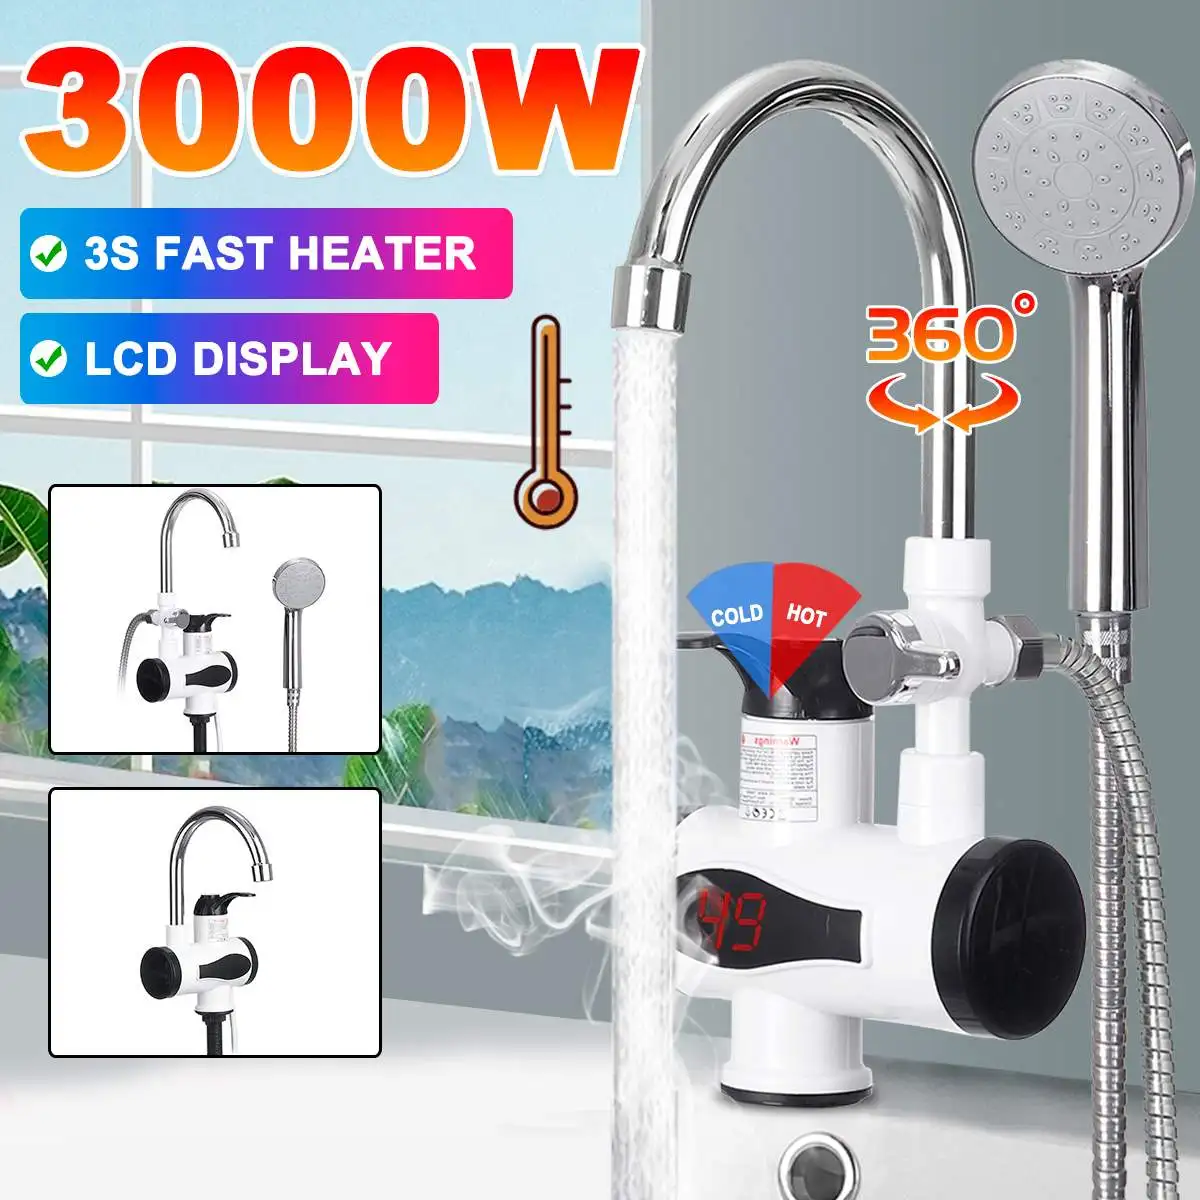 Water Heater Shower 220V Kitchen Faucet EU US Plug Electric Water Heater 3000W Digital Display 304 Stainless Steel Kitchen Toile